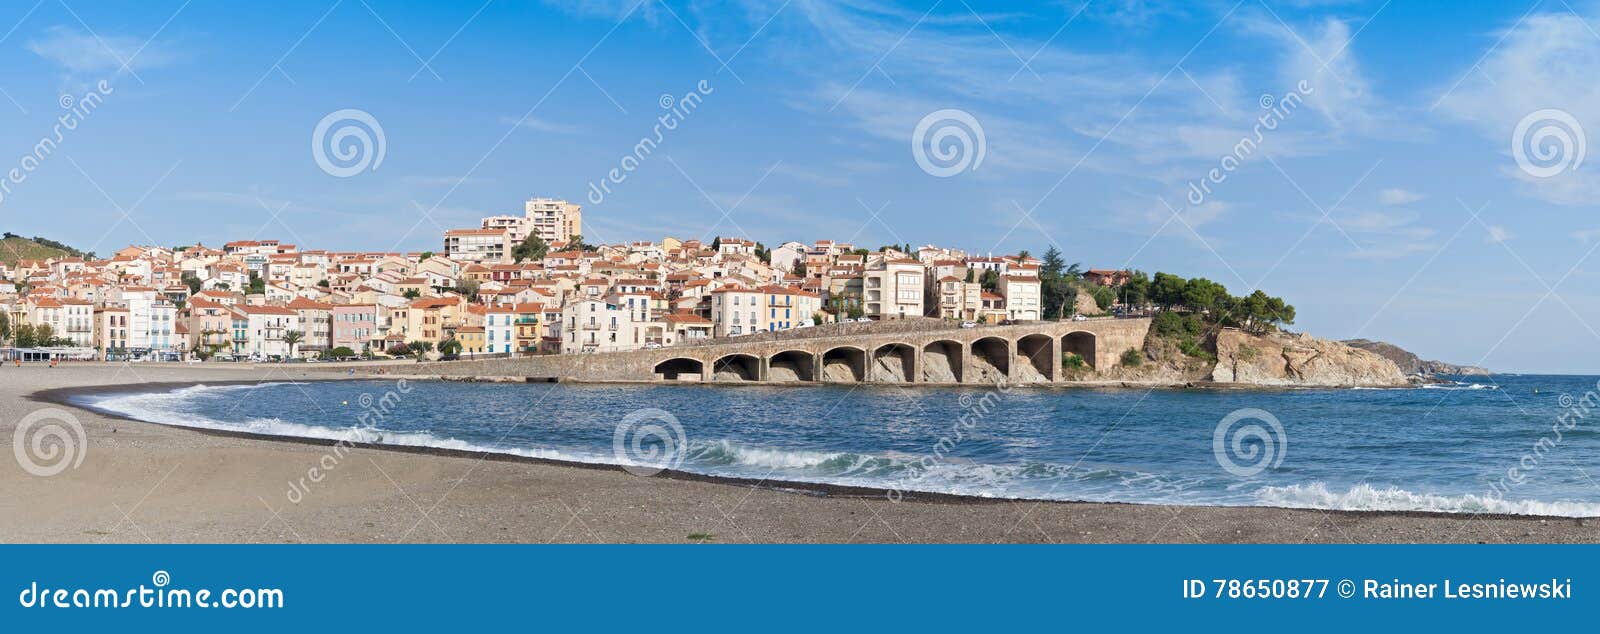 panorama of the commune banyuls-sur-mer, france